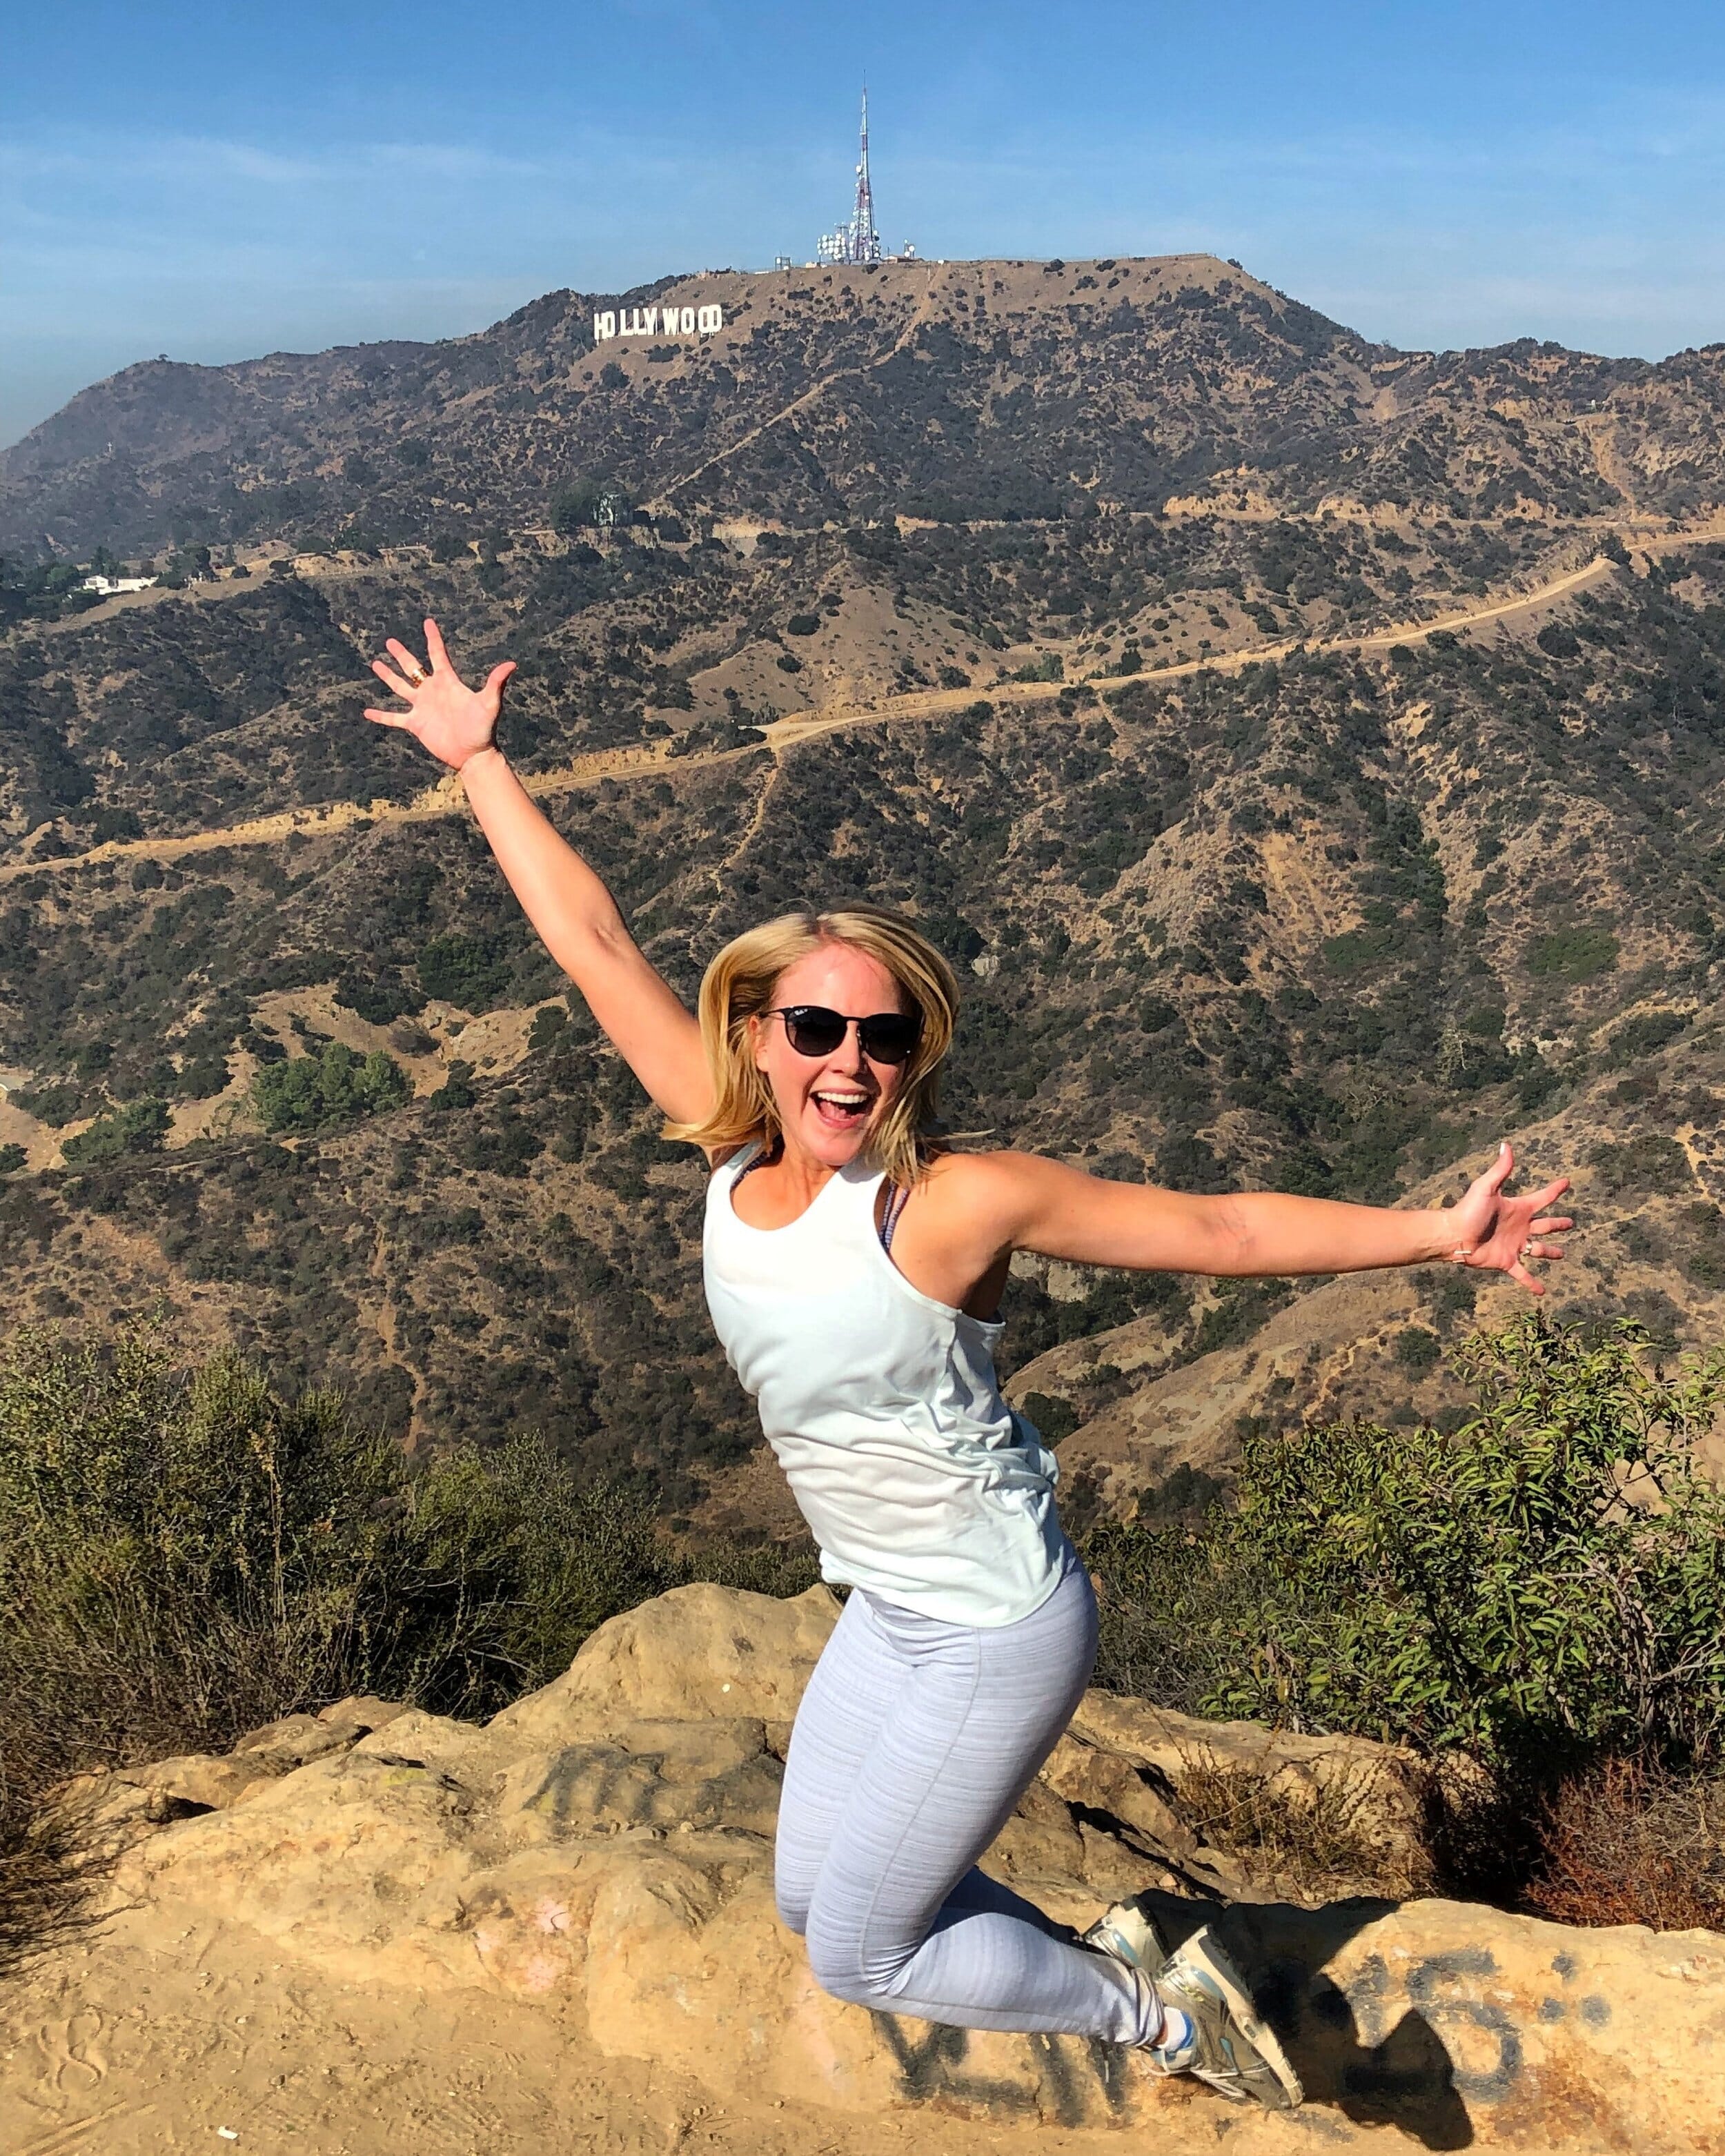 holly waters jumping for joy in front of the hollywood sign